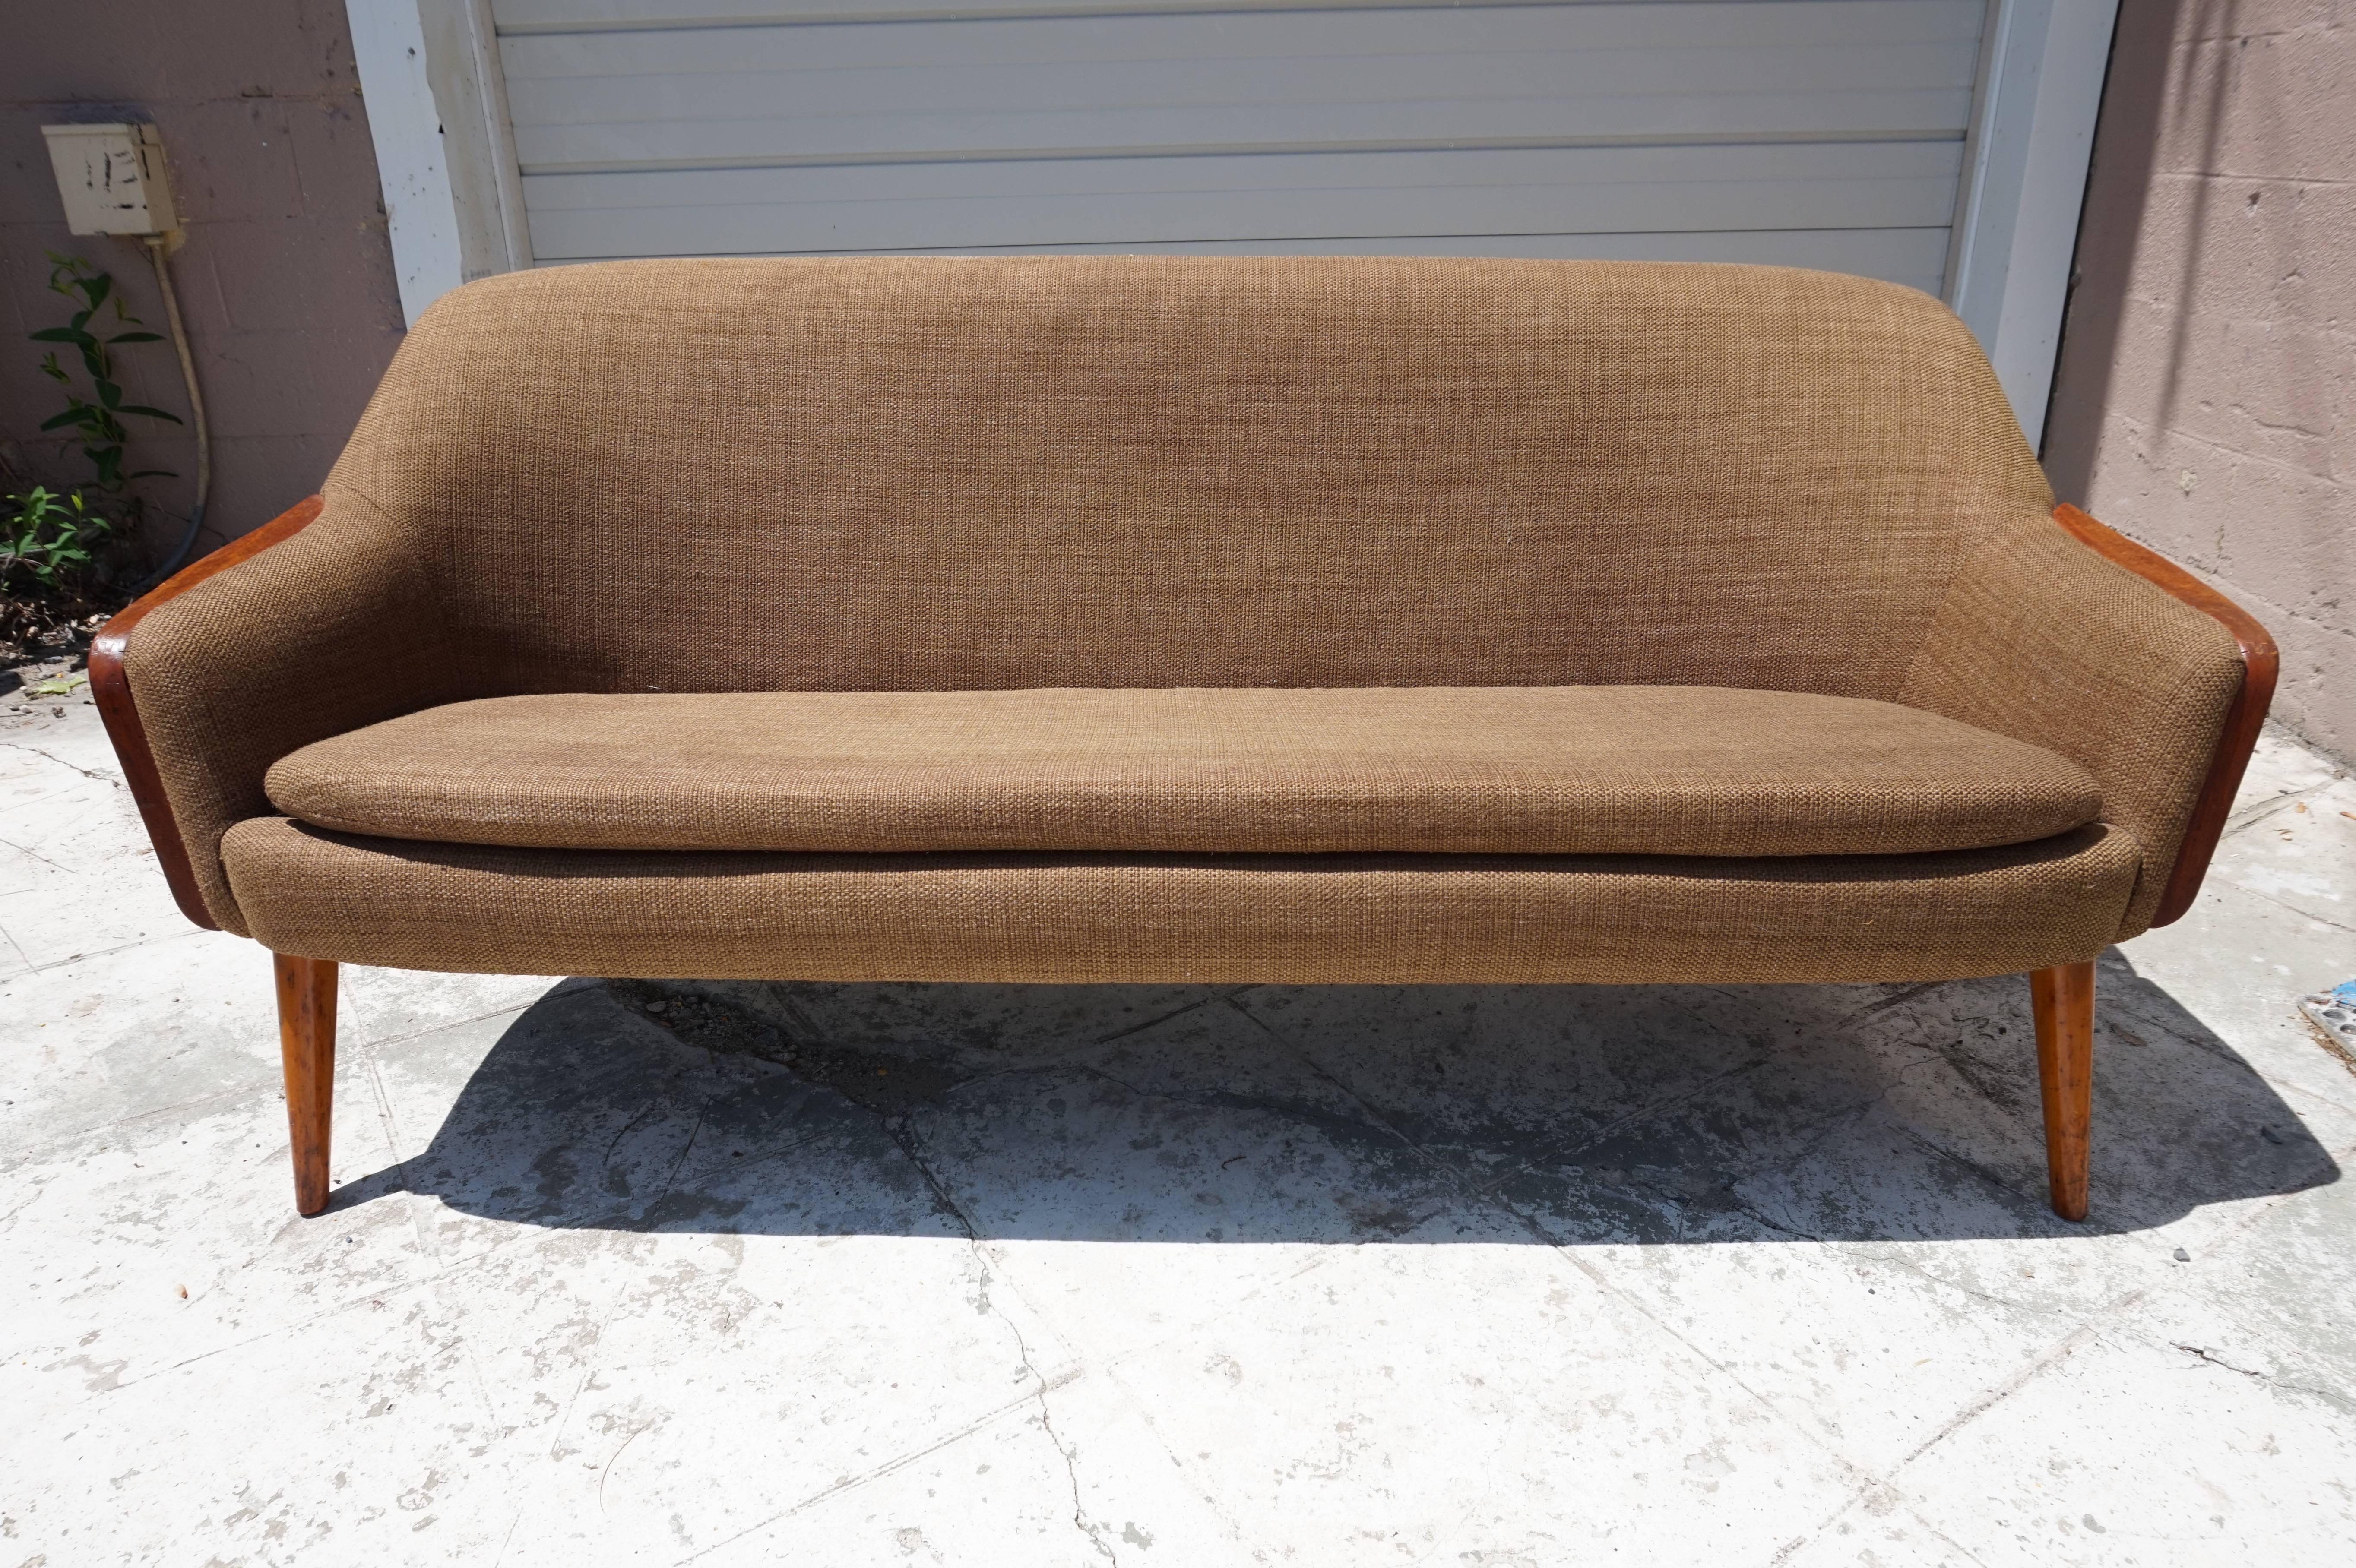 Handsome Nanna Ditzel style teak arm loveseat sofa. Great for a small apartment or special nook, this small sofa or loveseat packs a lot of Danish punch and surprisingly comfortable.